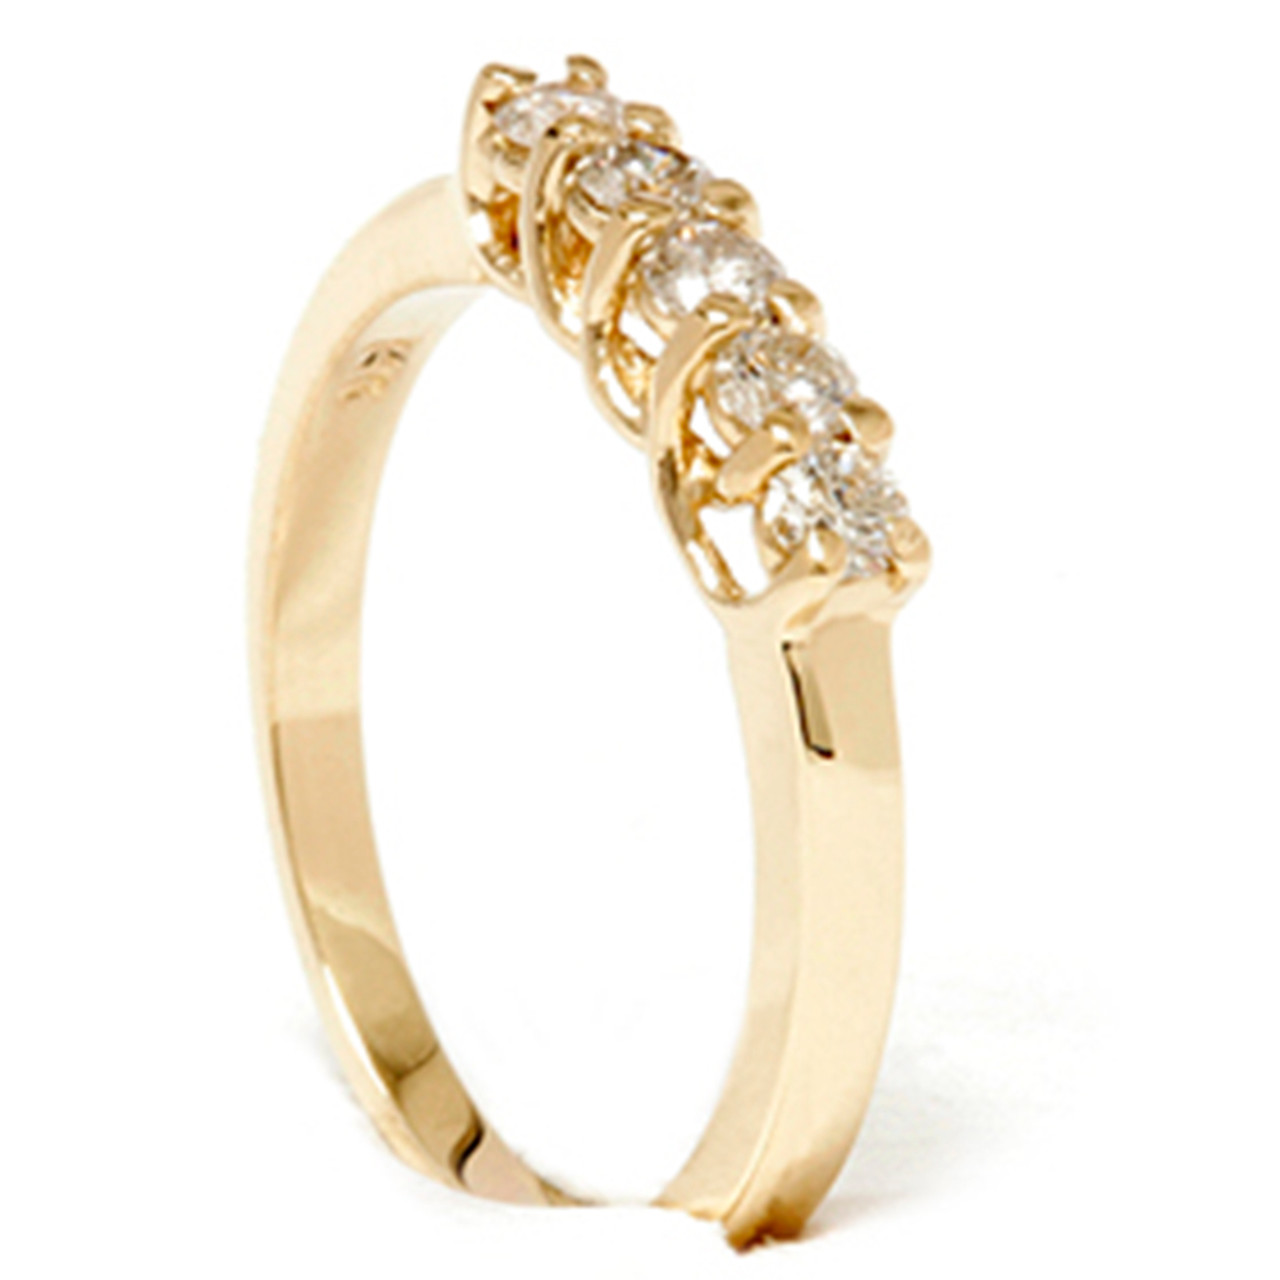 18ct Yellow Gold Diamond Ring 1.00ct TDW - Free Delivery and 5